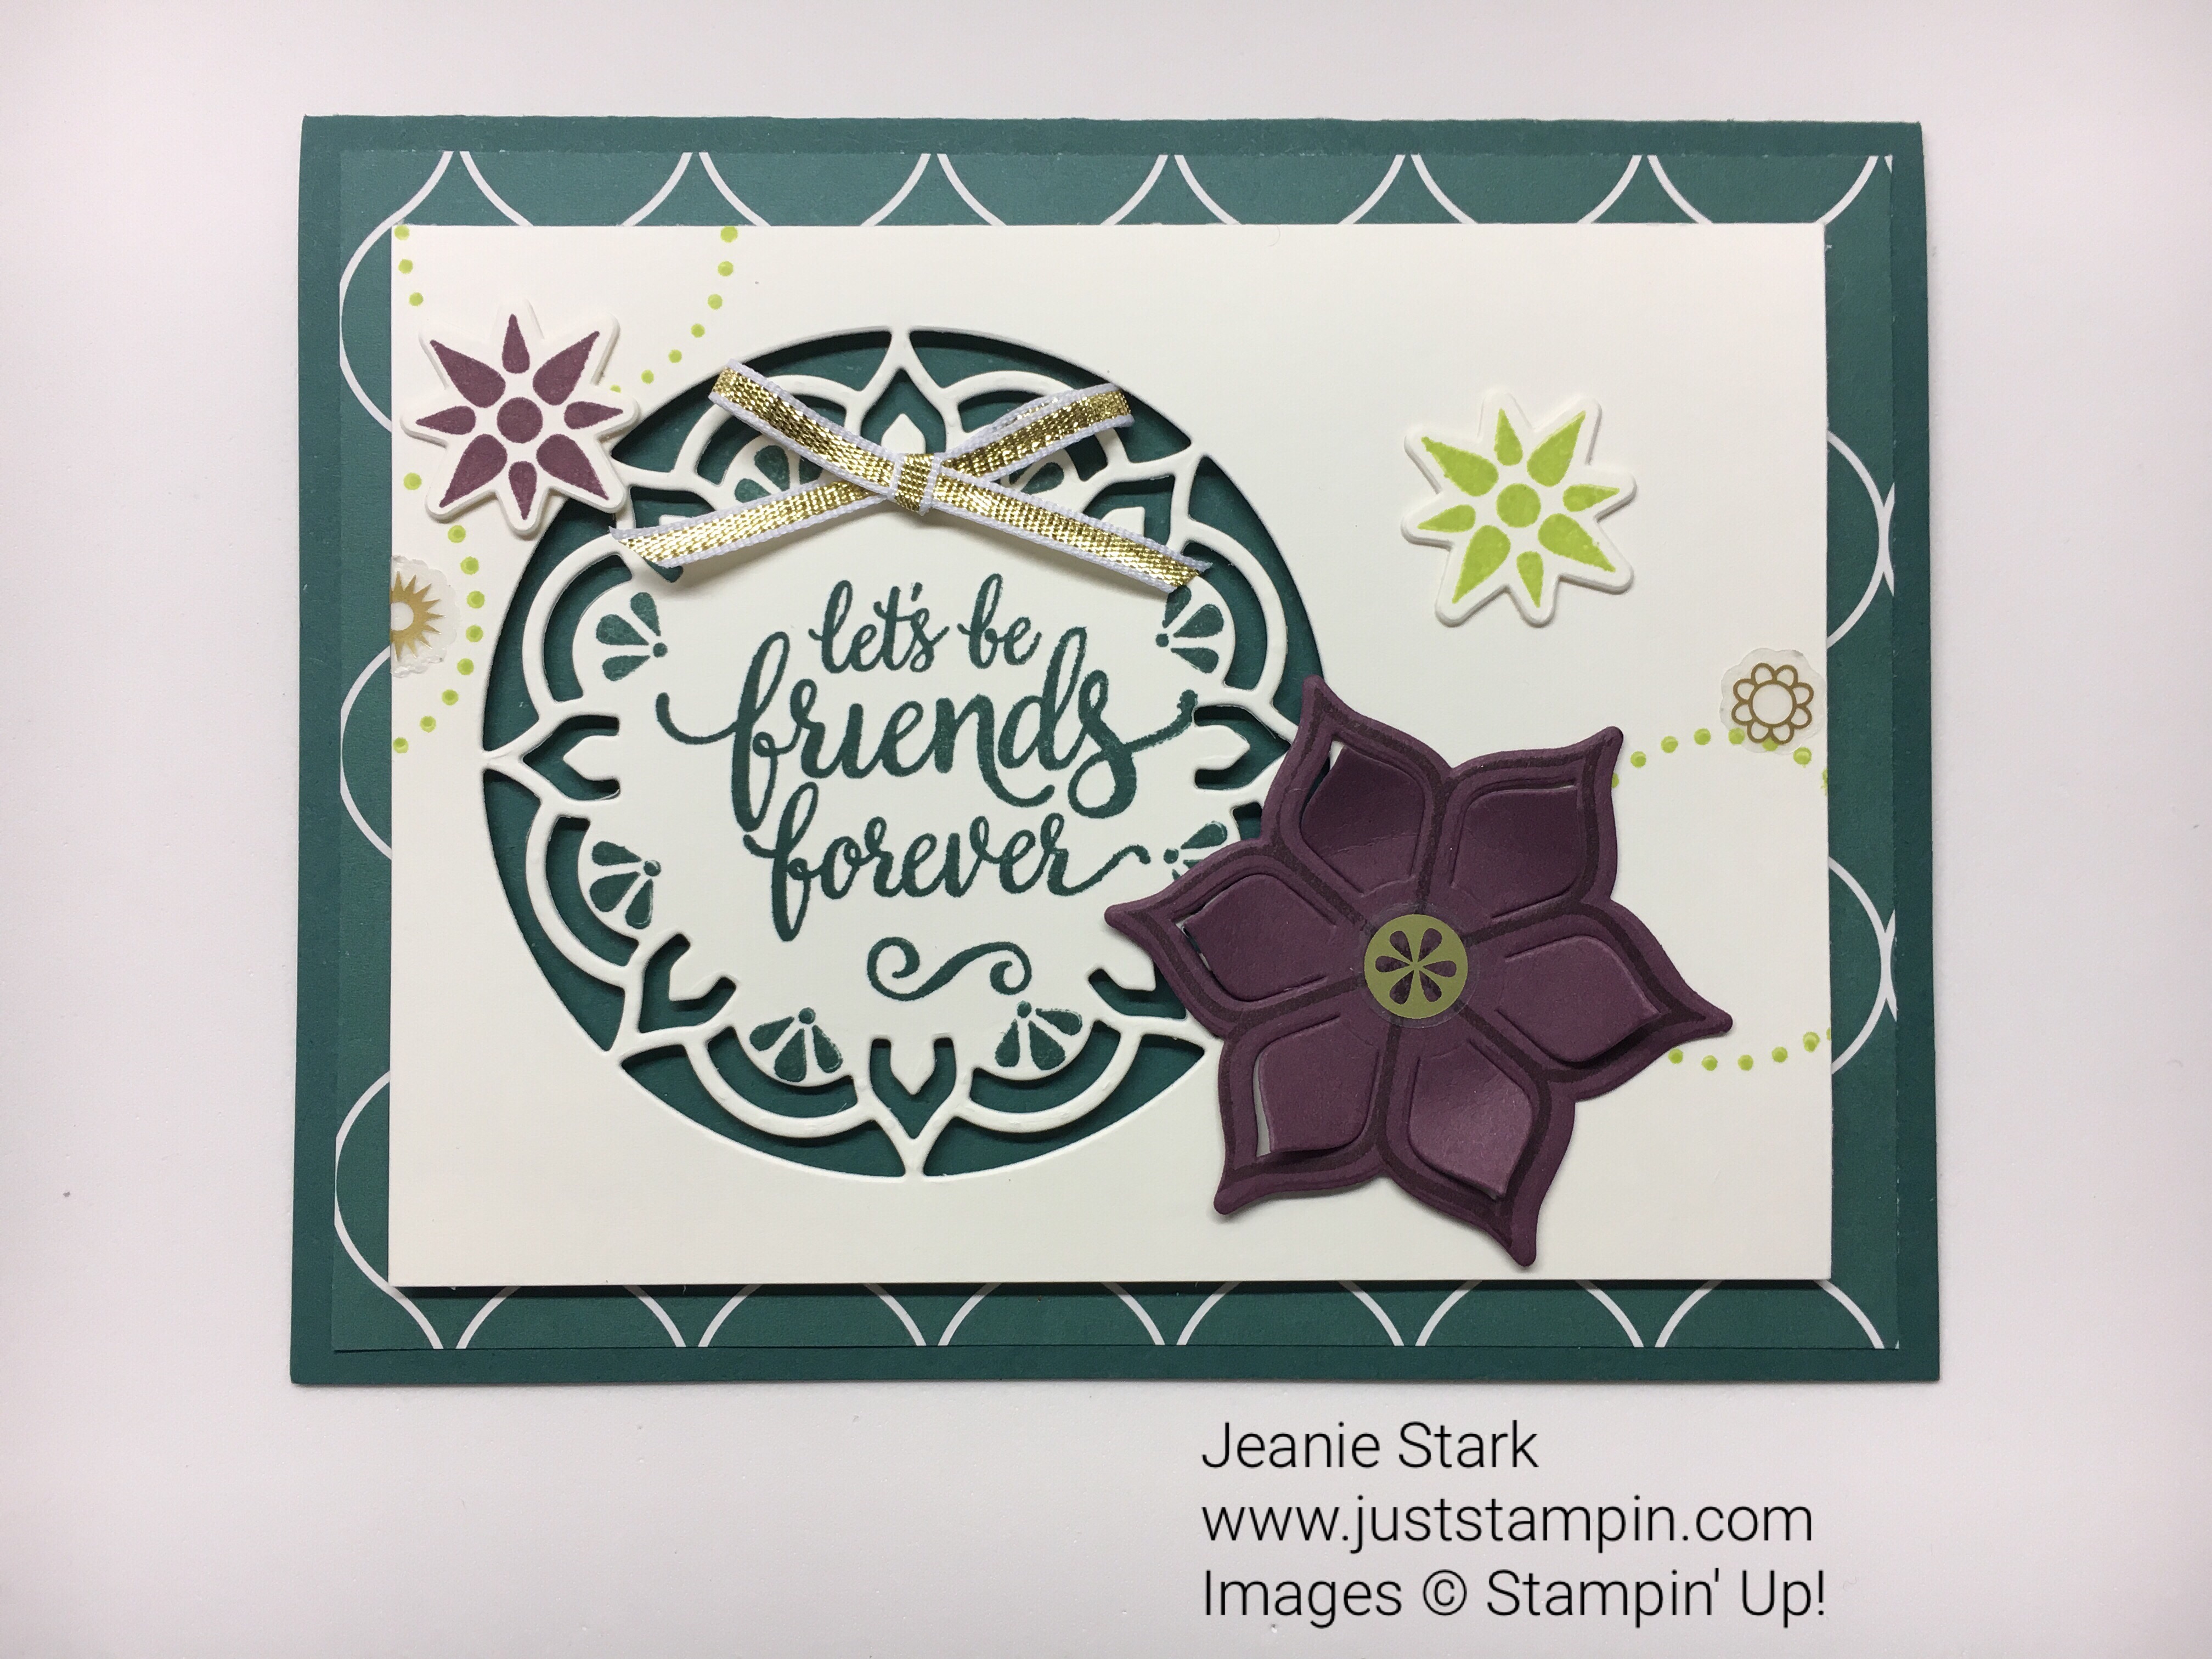 Stampin Up Eastern Palace Suite friend card idea - Jeanie Stark StampinUp